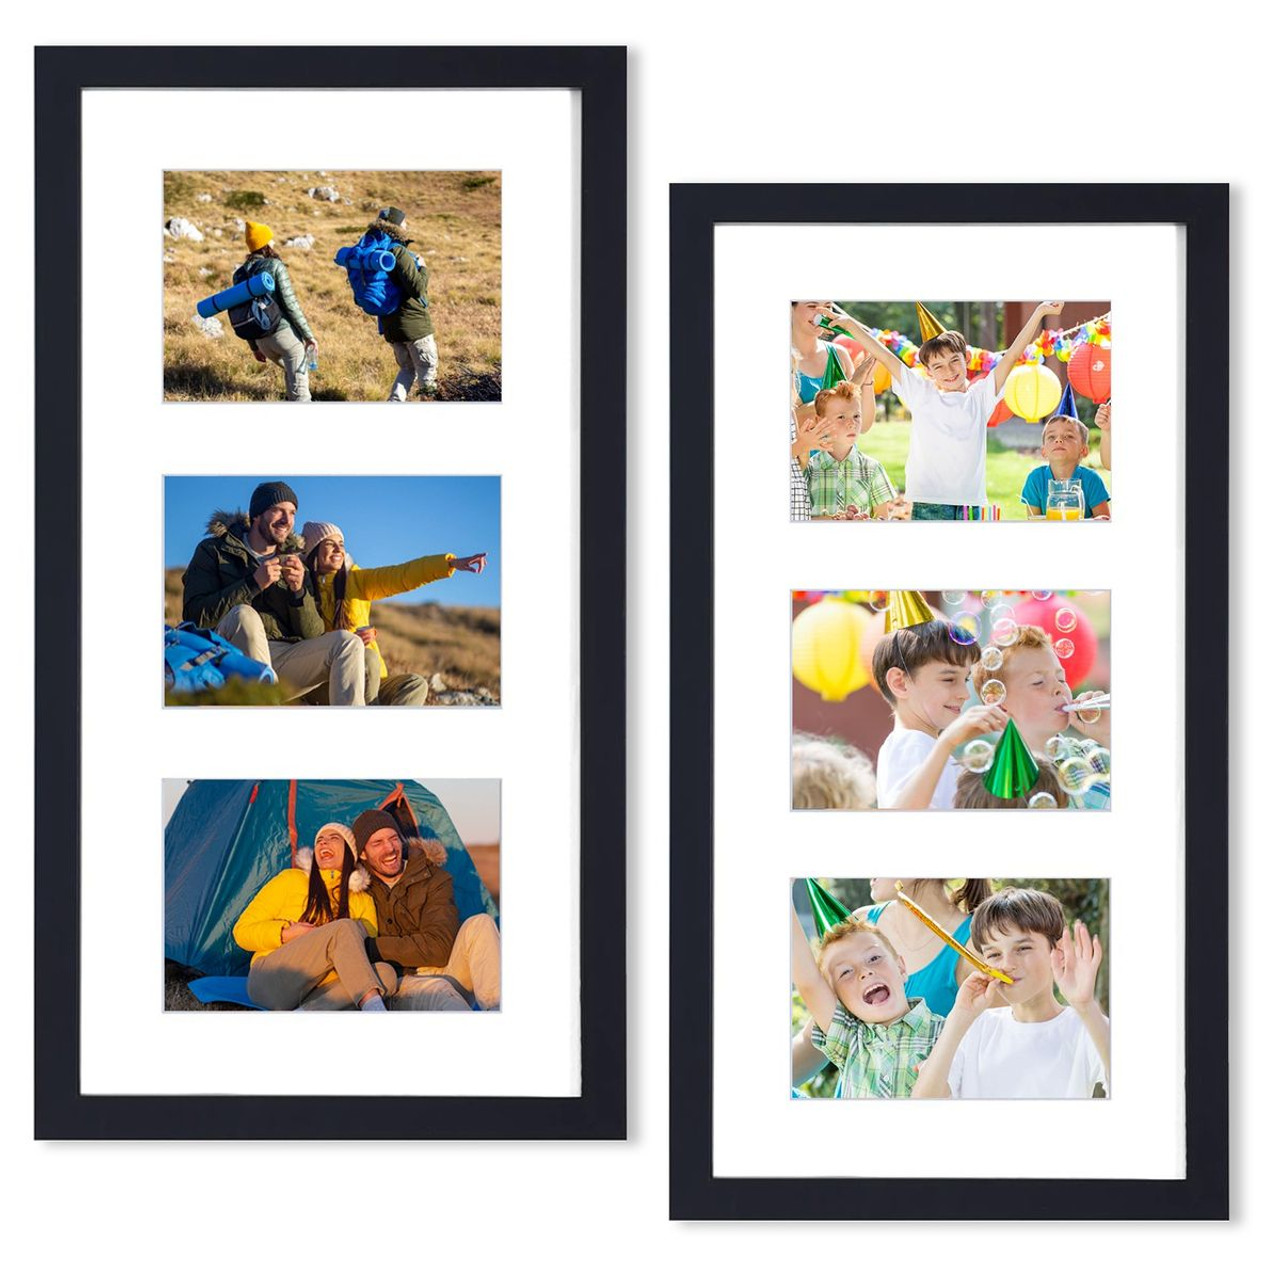 iMounTEK® 5 x 7-Inch 3-Opening Picture Frame (2-Pack) product image